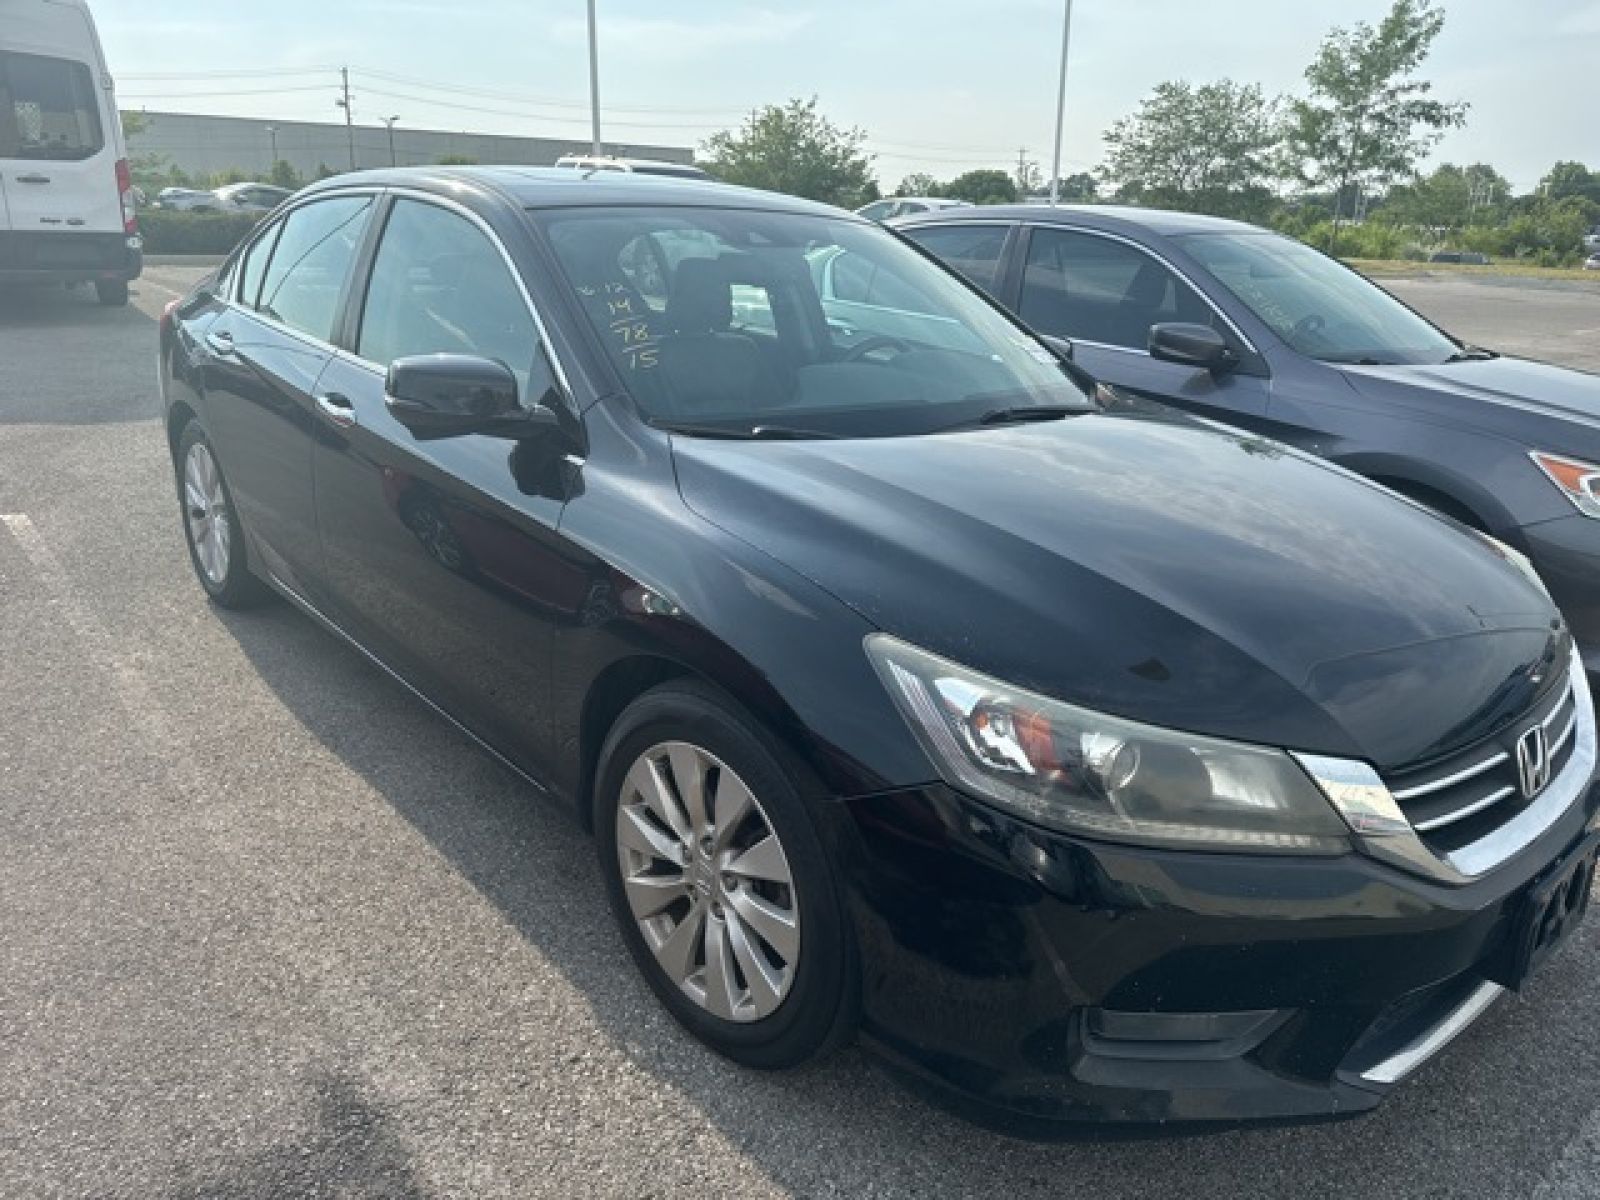 Used, 2015 Honda Accord EX-L, Other, P0616-2